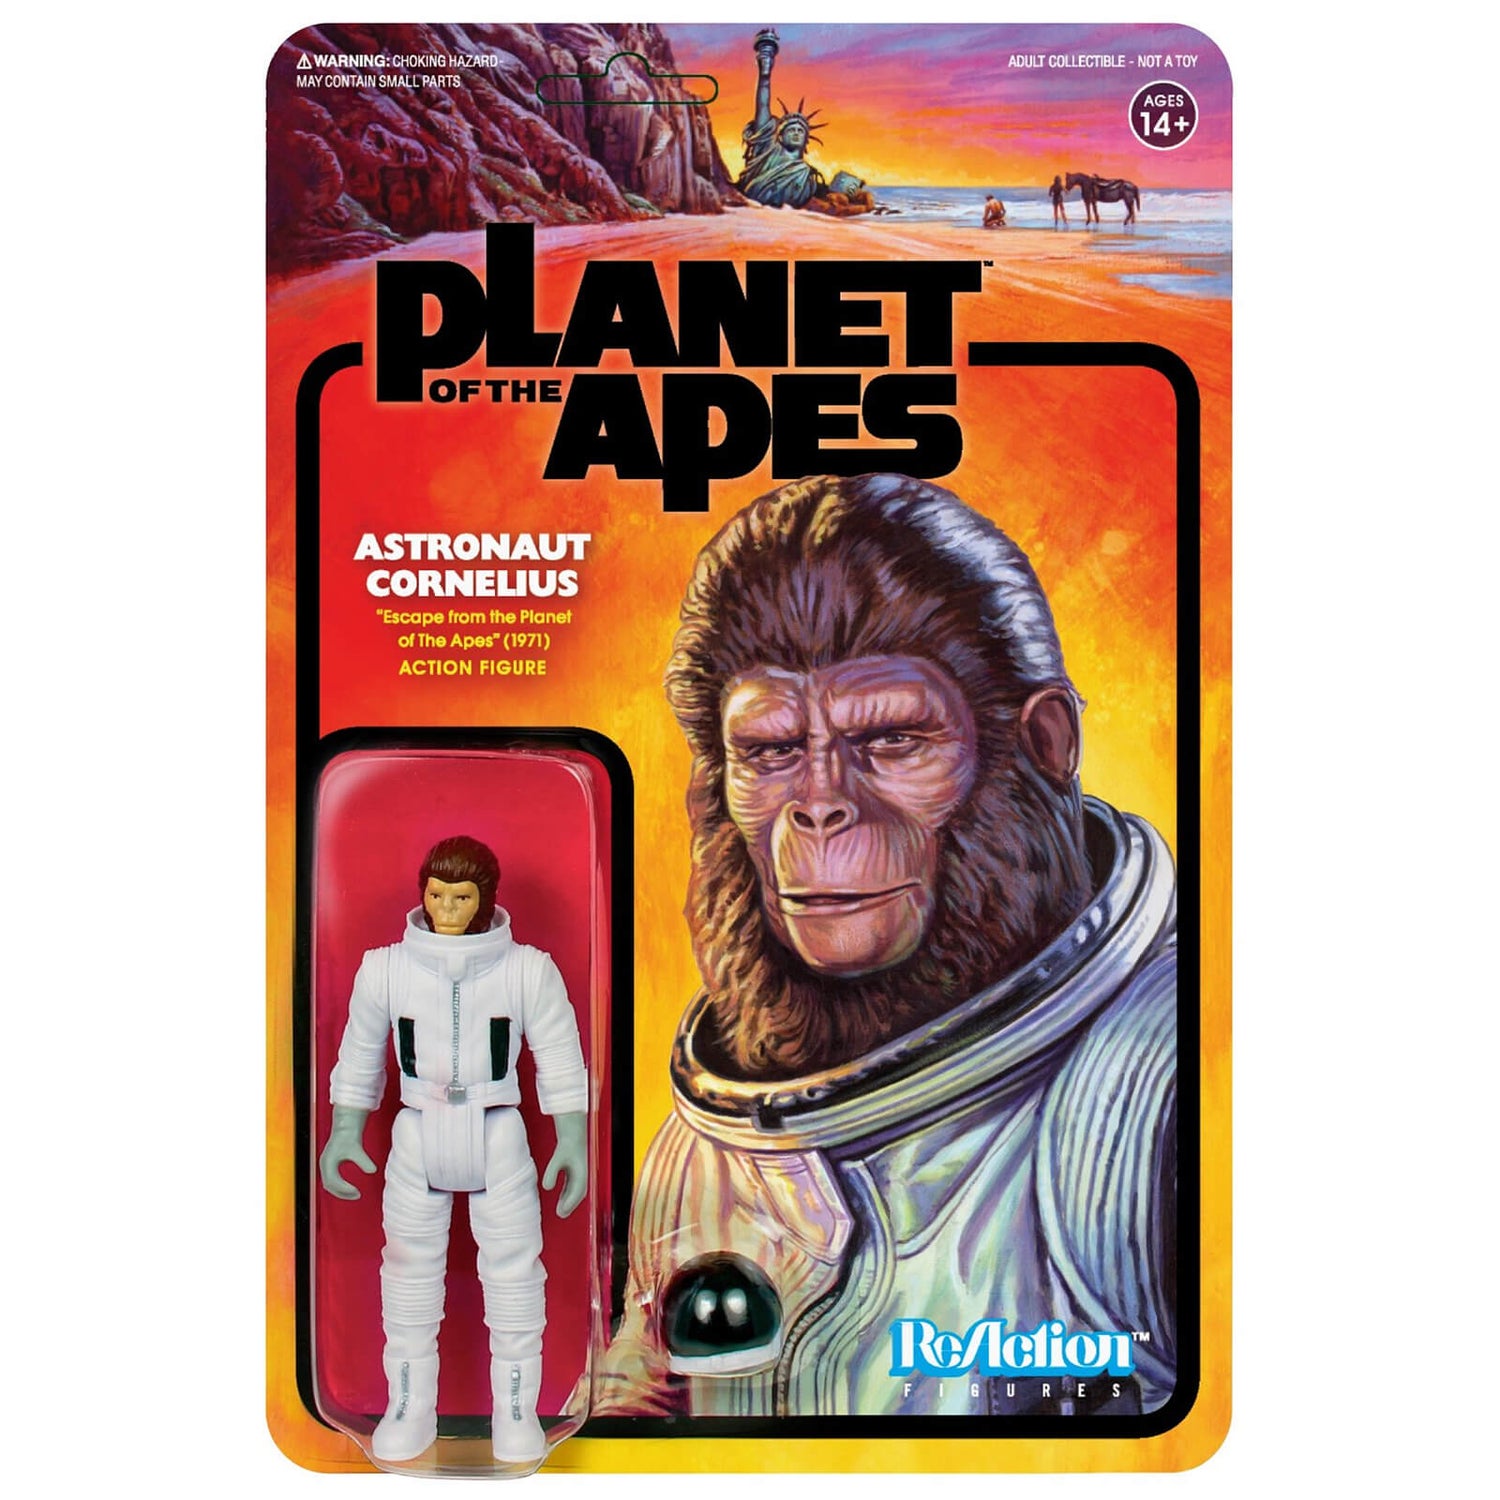 PLANET OF THE APES コーネリアス フィギュア - SF